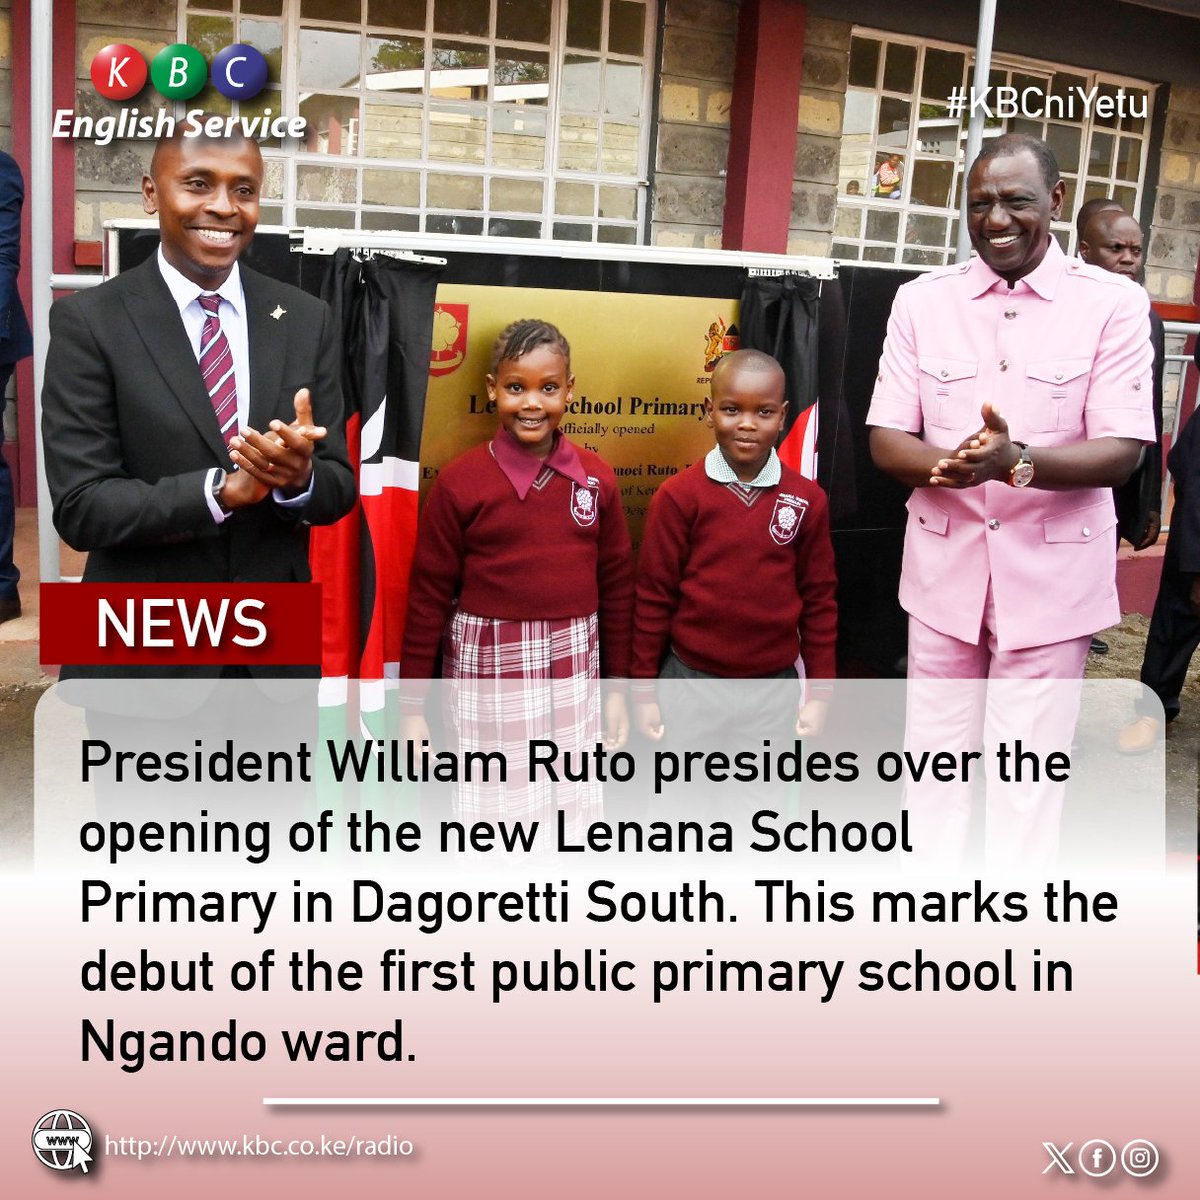 President William Ruto presides over the opening of the new Lenana School Primary in Dagoretti South. This marks the debut of the first public primary school in Ngando ward. ^PMN #KBCEnglishService